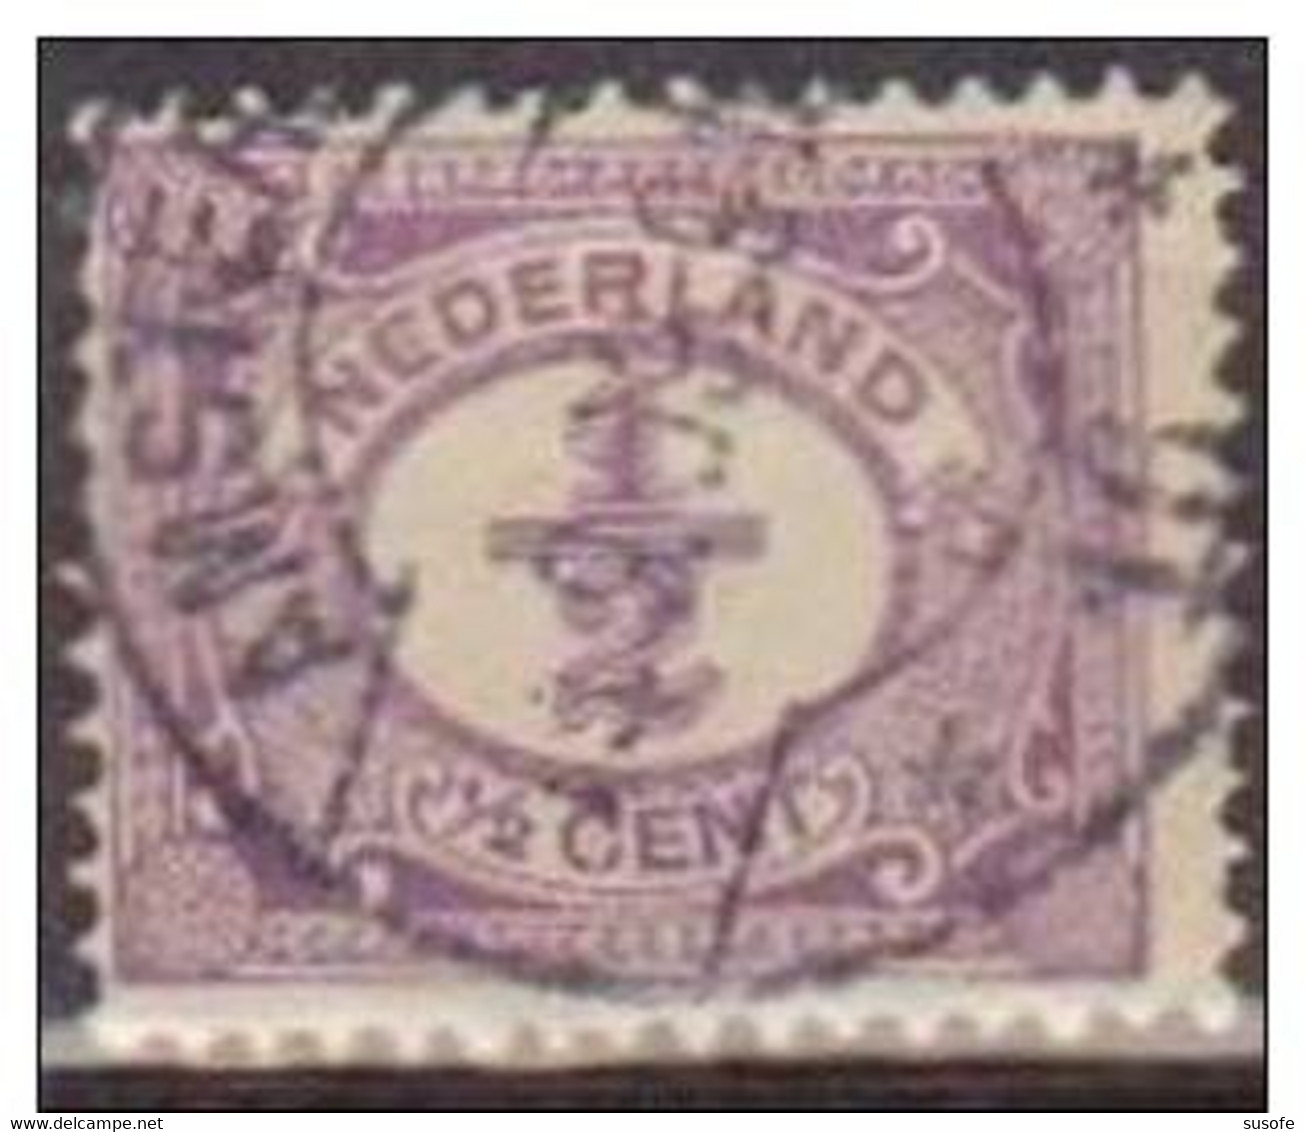 Holanda 1898-1924 Scott 55 Sello º Cifras Numeros Michel 49 Yvert 65 Nederland Paises Bajos Stamps Timbre Pays-Bas - Used Stamps